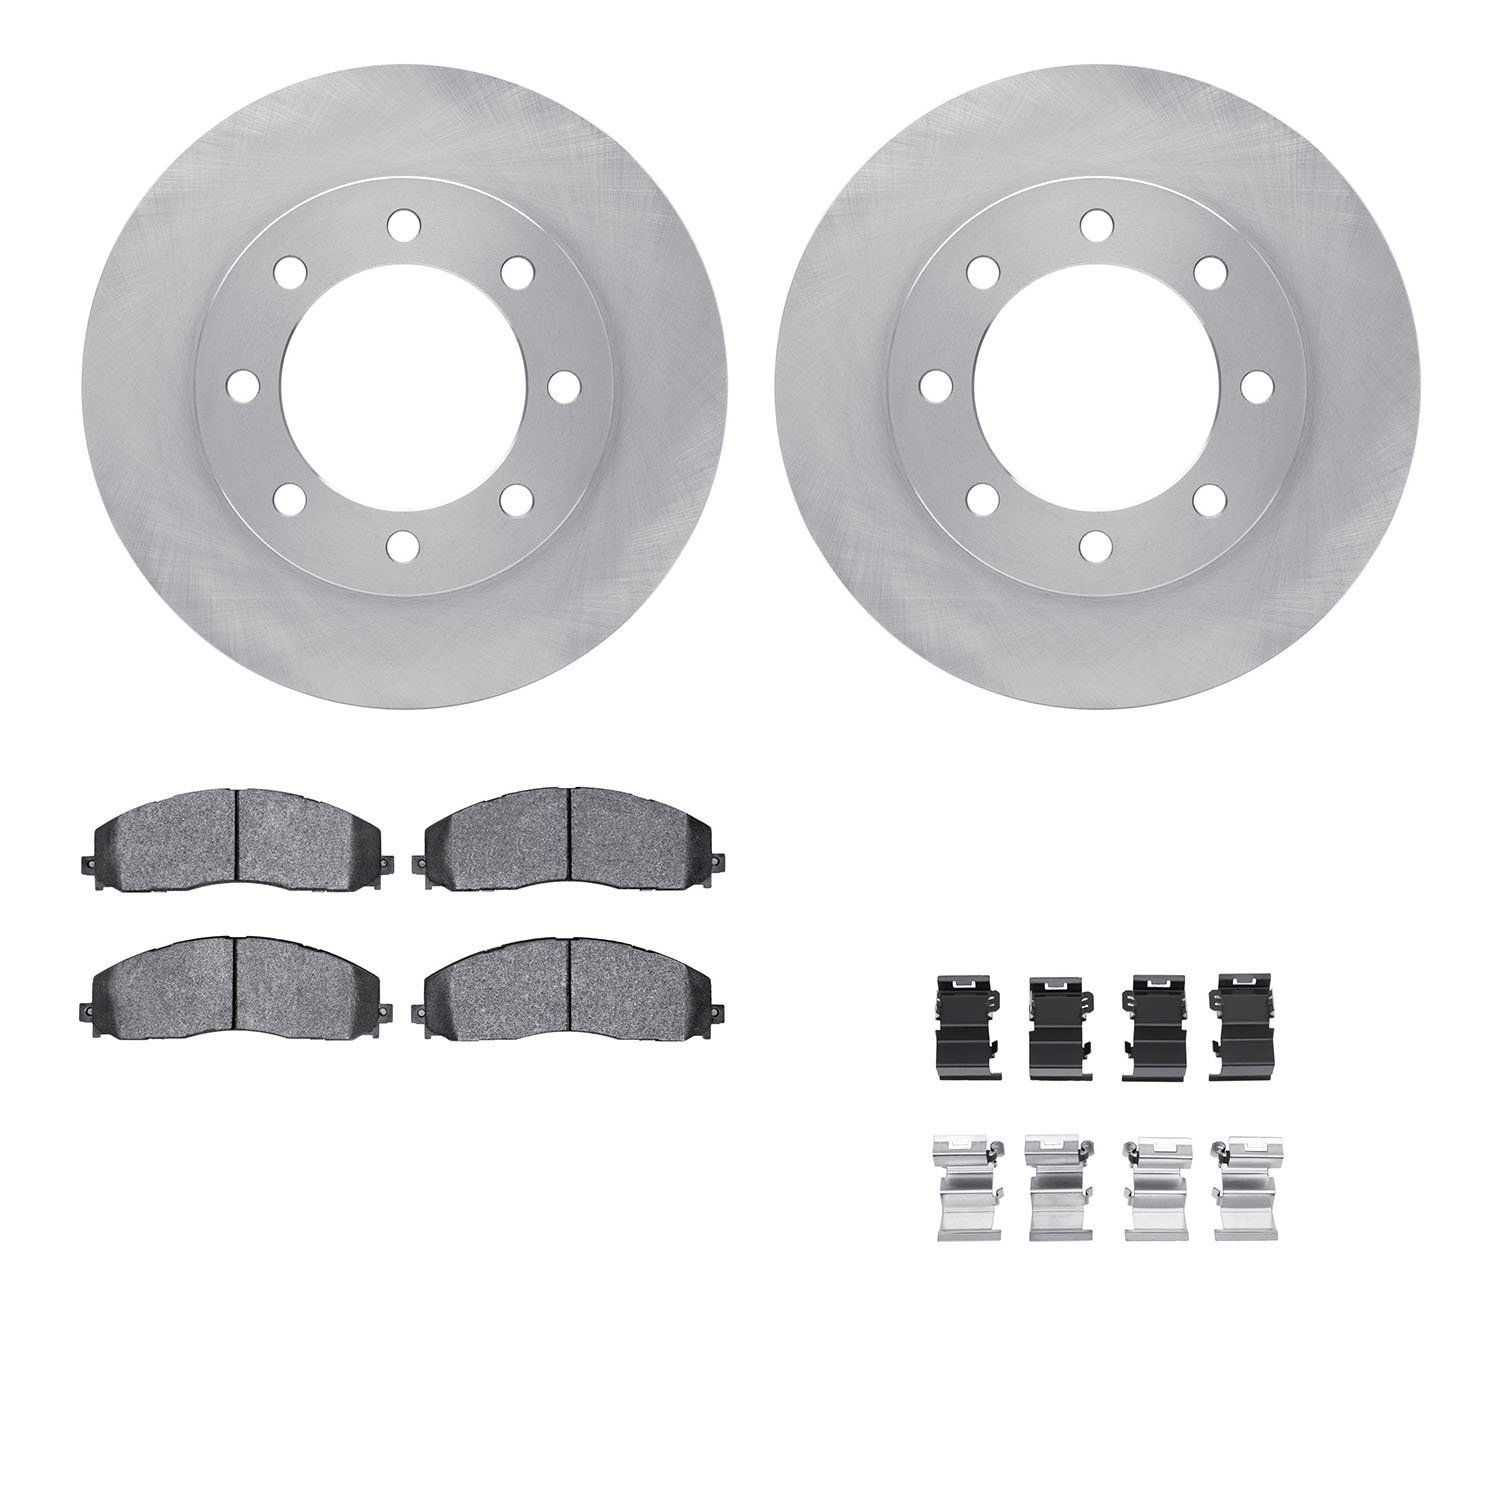 6412-54290 Brake Rotors with Ultimate-Duty Brake Pads Kit & Hardware, Fits Select Ford/Lincoln/Mercury/Mazda, Position: Front